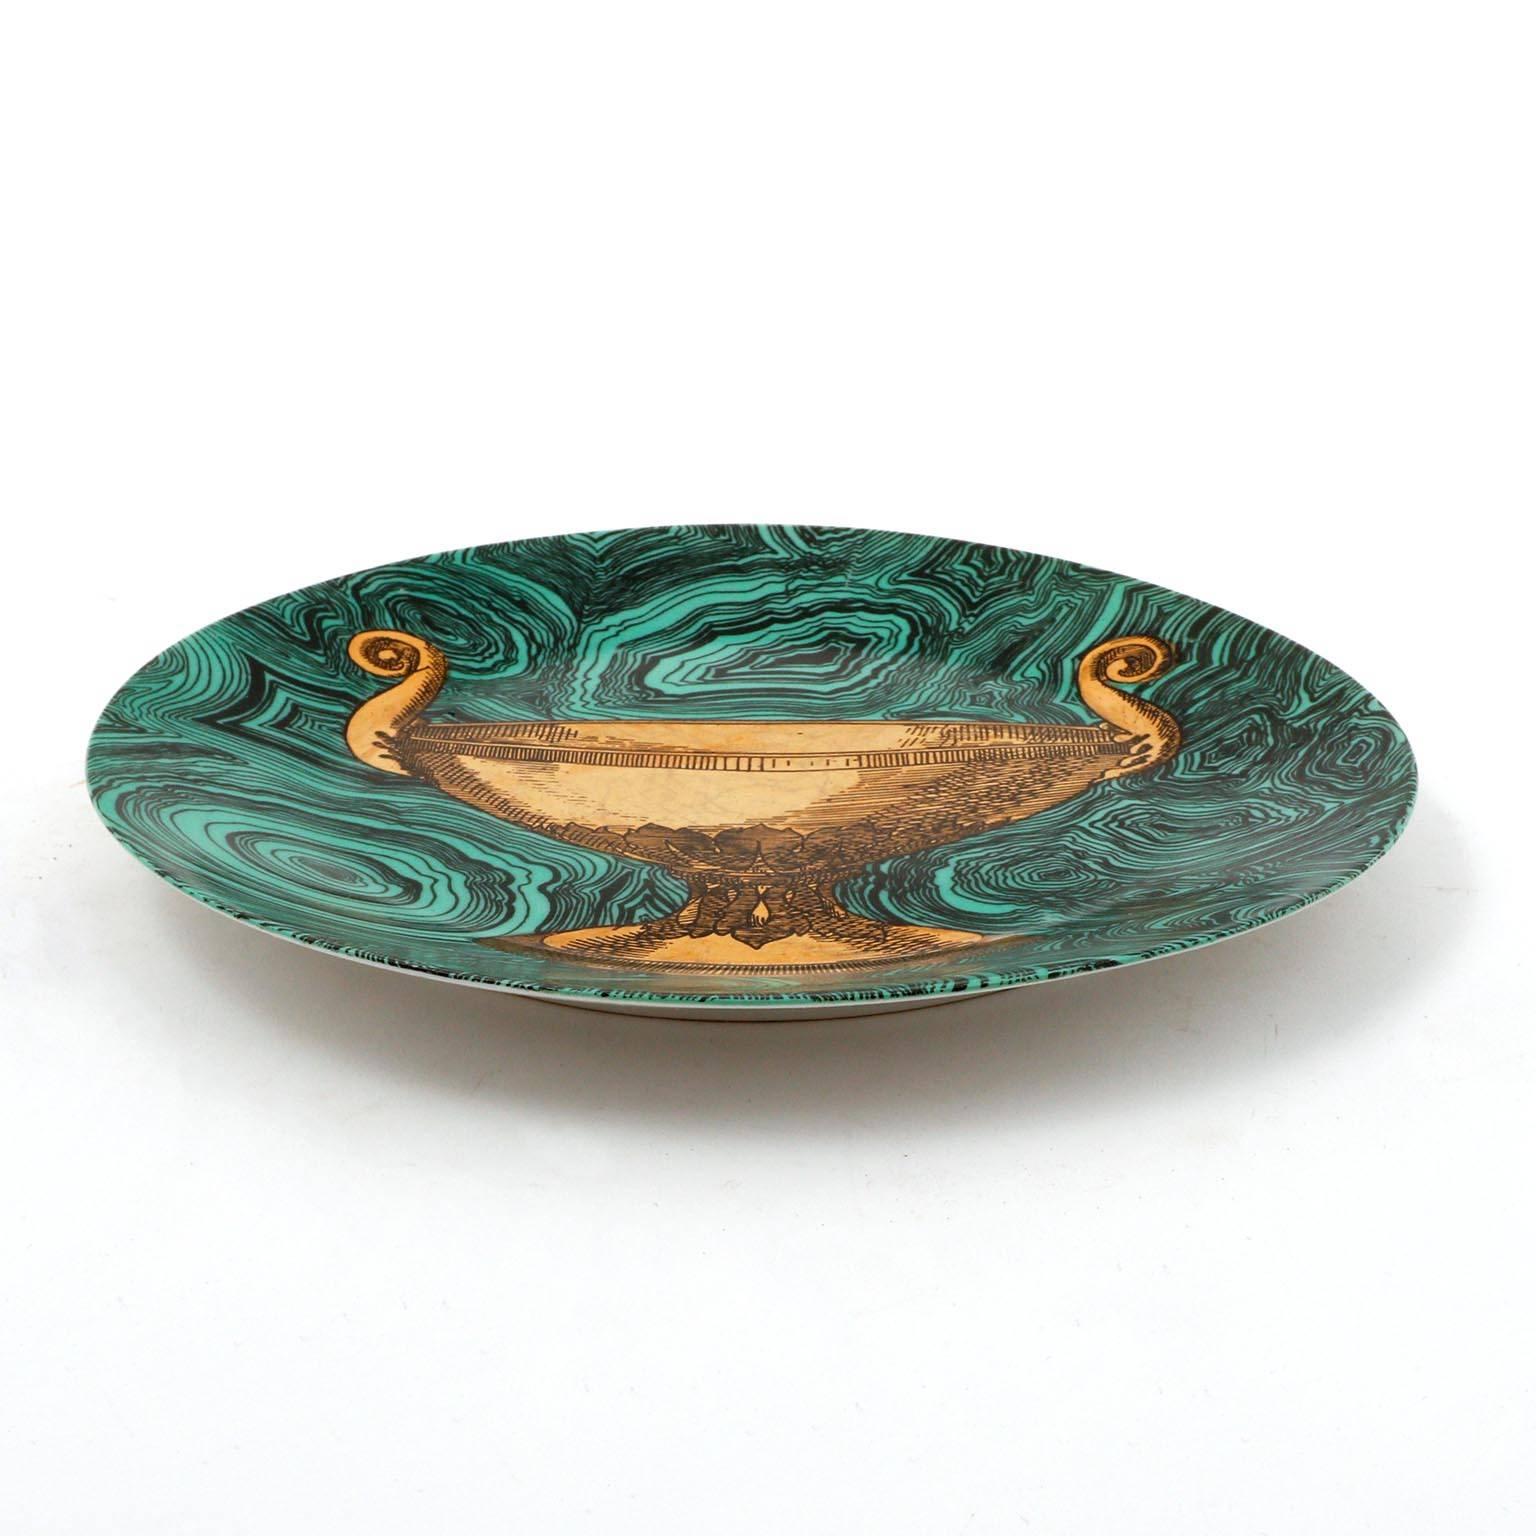 A ceramic or porcelain dish with an emerald green faux malachite ground and painted in gold by Piero Fornasetti, Italy, manufactured in Mid-Century in 1950s. 
This hand-colored decorative plate is one in a series of ‘faux malachite’ designs that